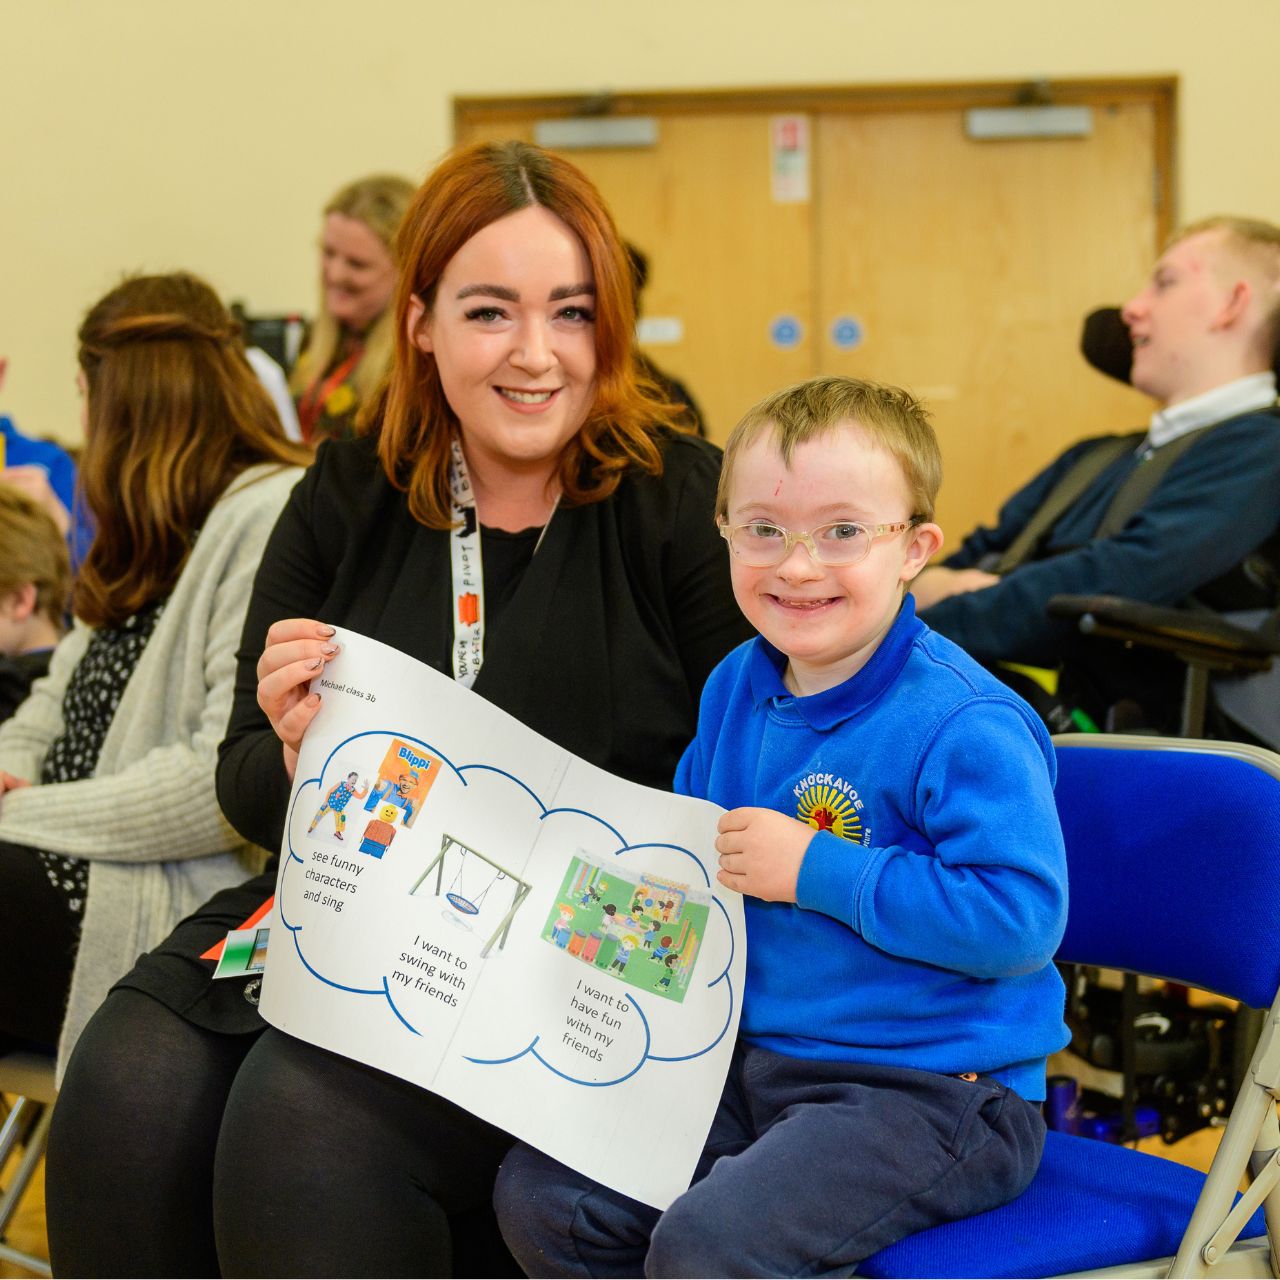 This photograph shows a young pupil and his teacher holding up a picture that he has drawn to show what he would like to see in an inclusive play park.   